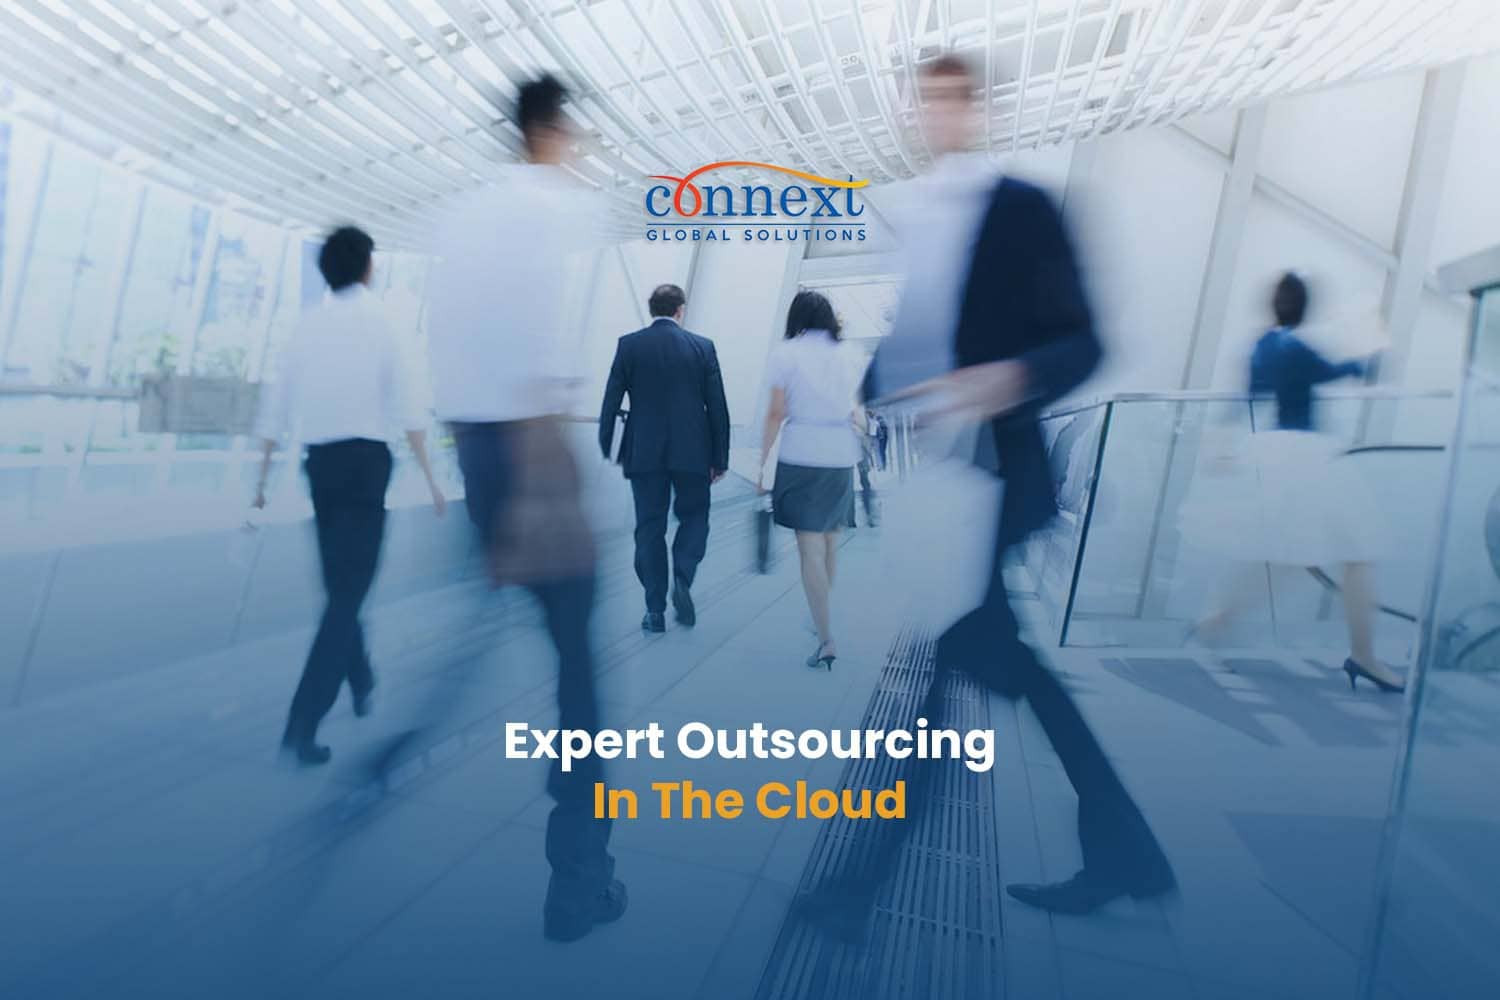 Connext: Expert Business Process Outsourcing In The Cloud